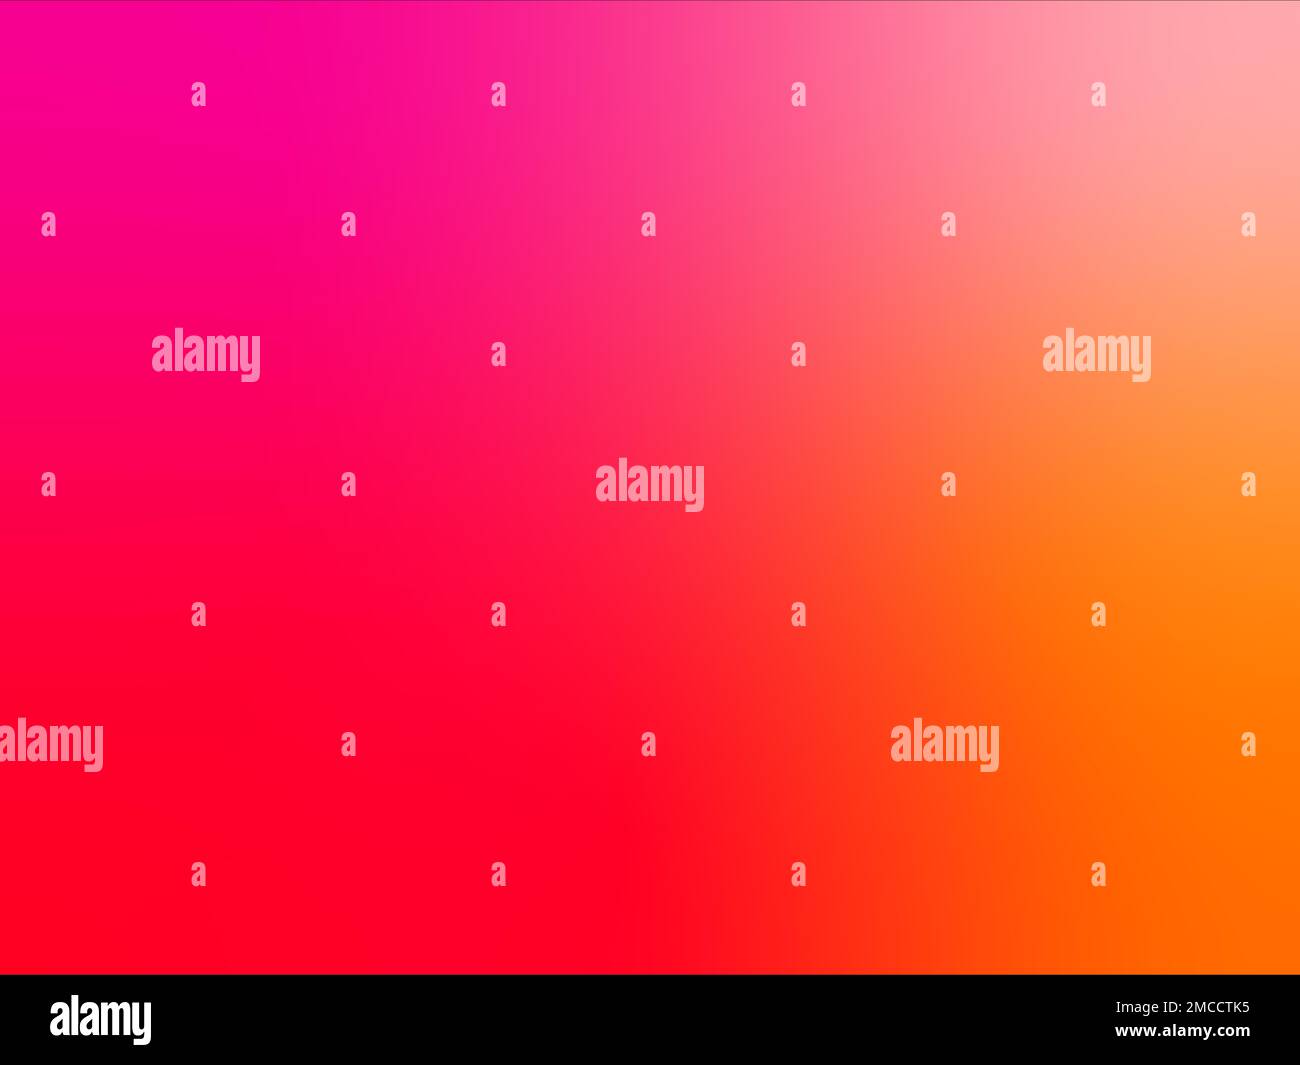 Colour gradient, mesh gradient, abstract background, image, bright colours, red, pink, orange, illustration Stock Photo